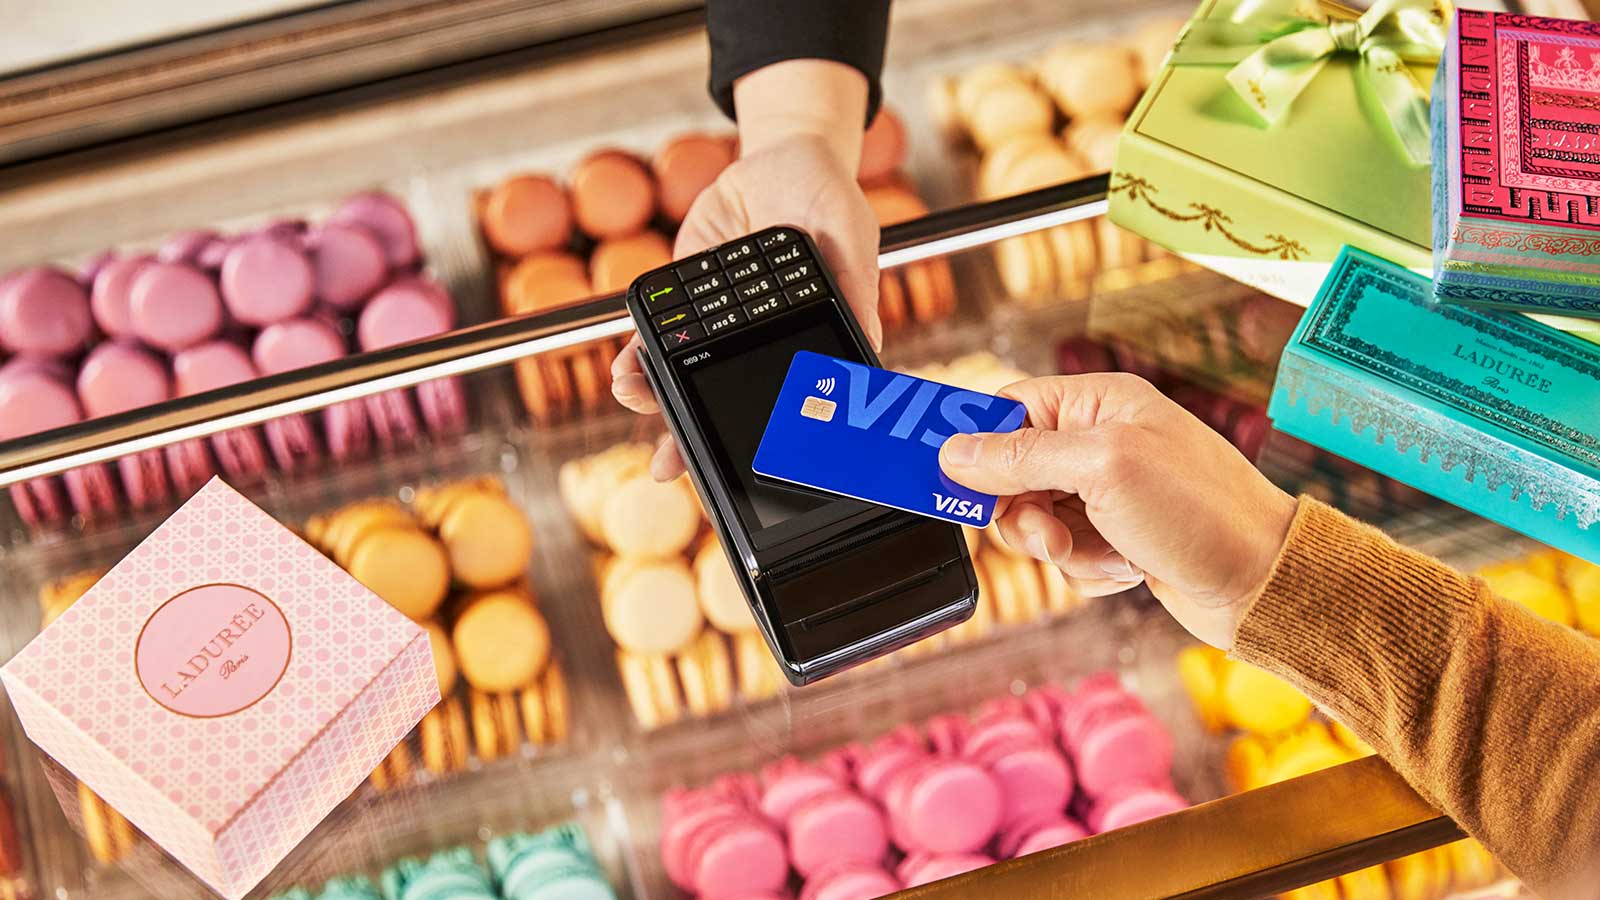 Customer using contactless payment Visa card to purchase baked goods